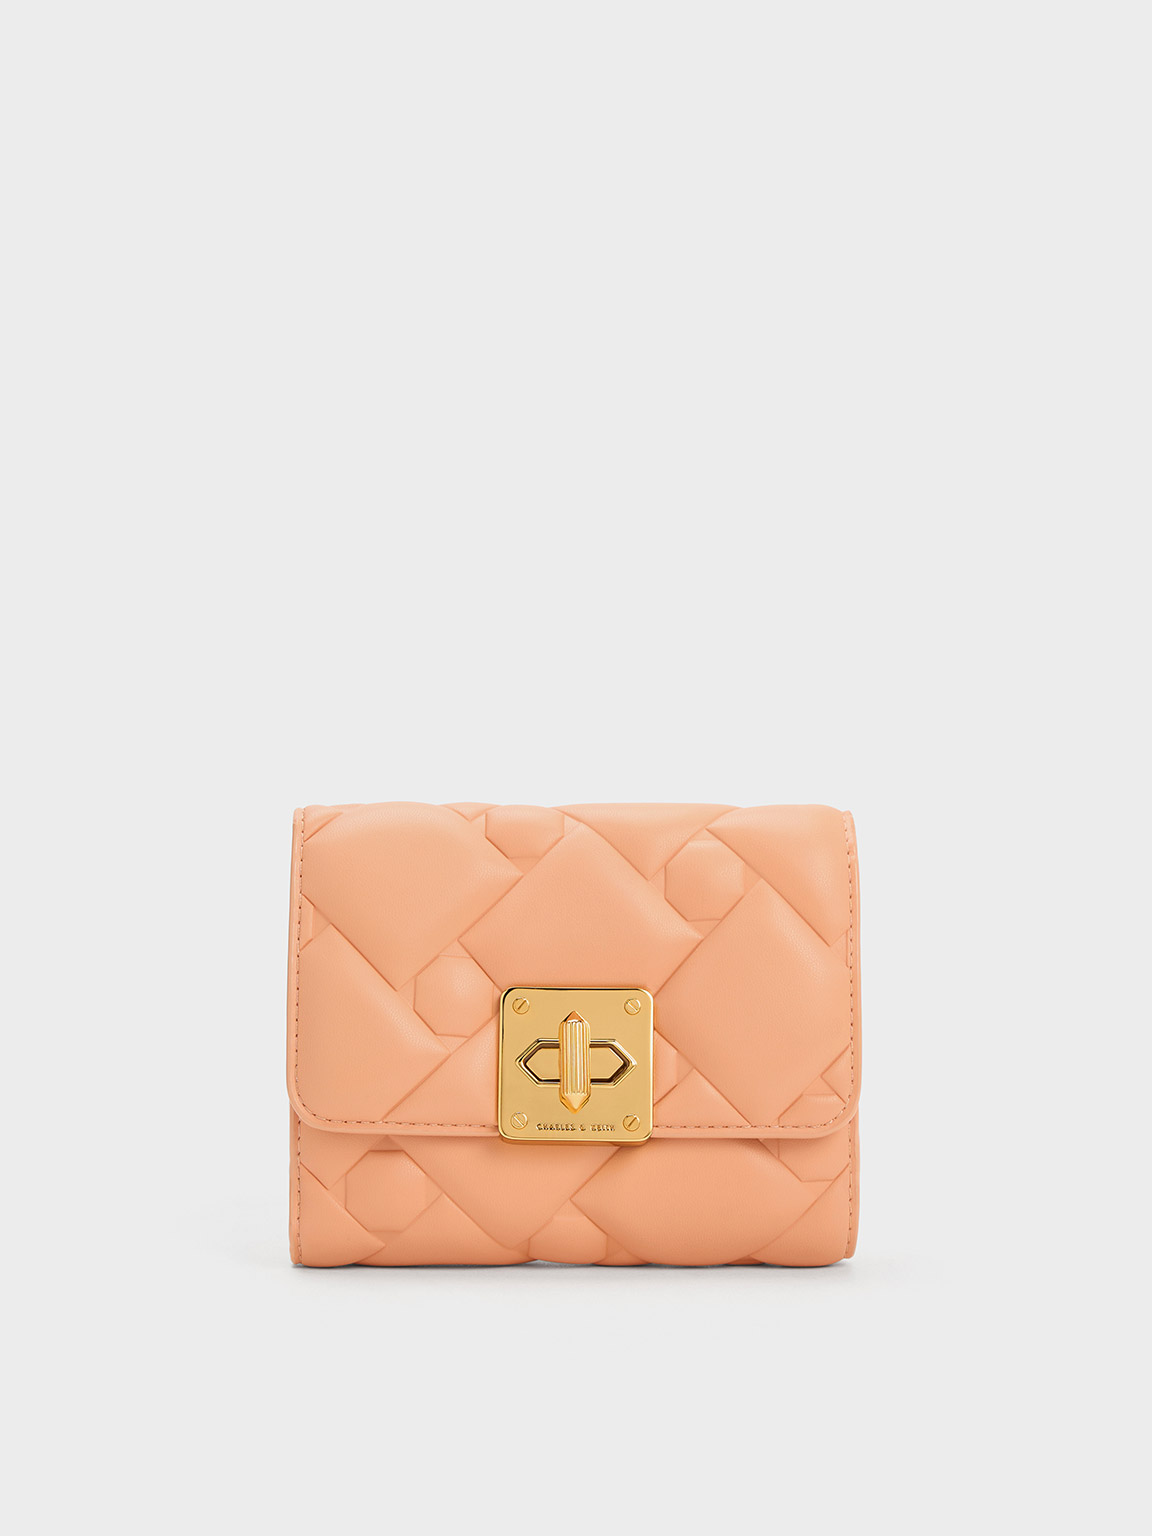 Charles & Keith - Women's Tillie Quilted Wallet, Orange, Xxs